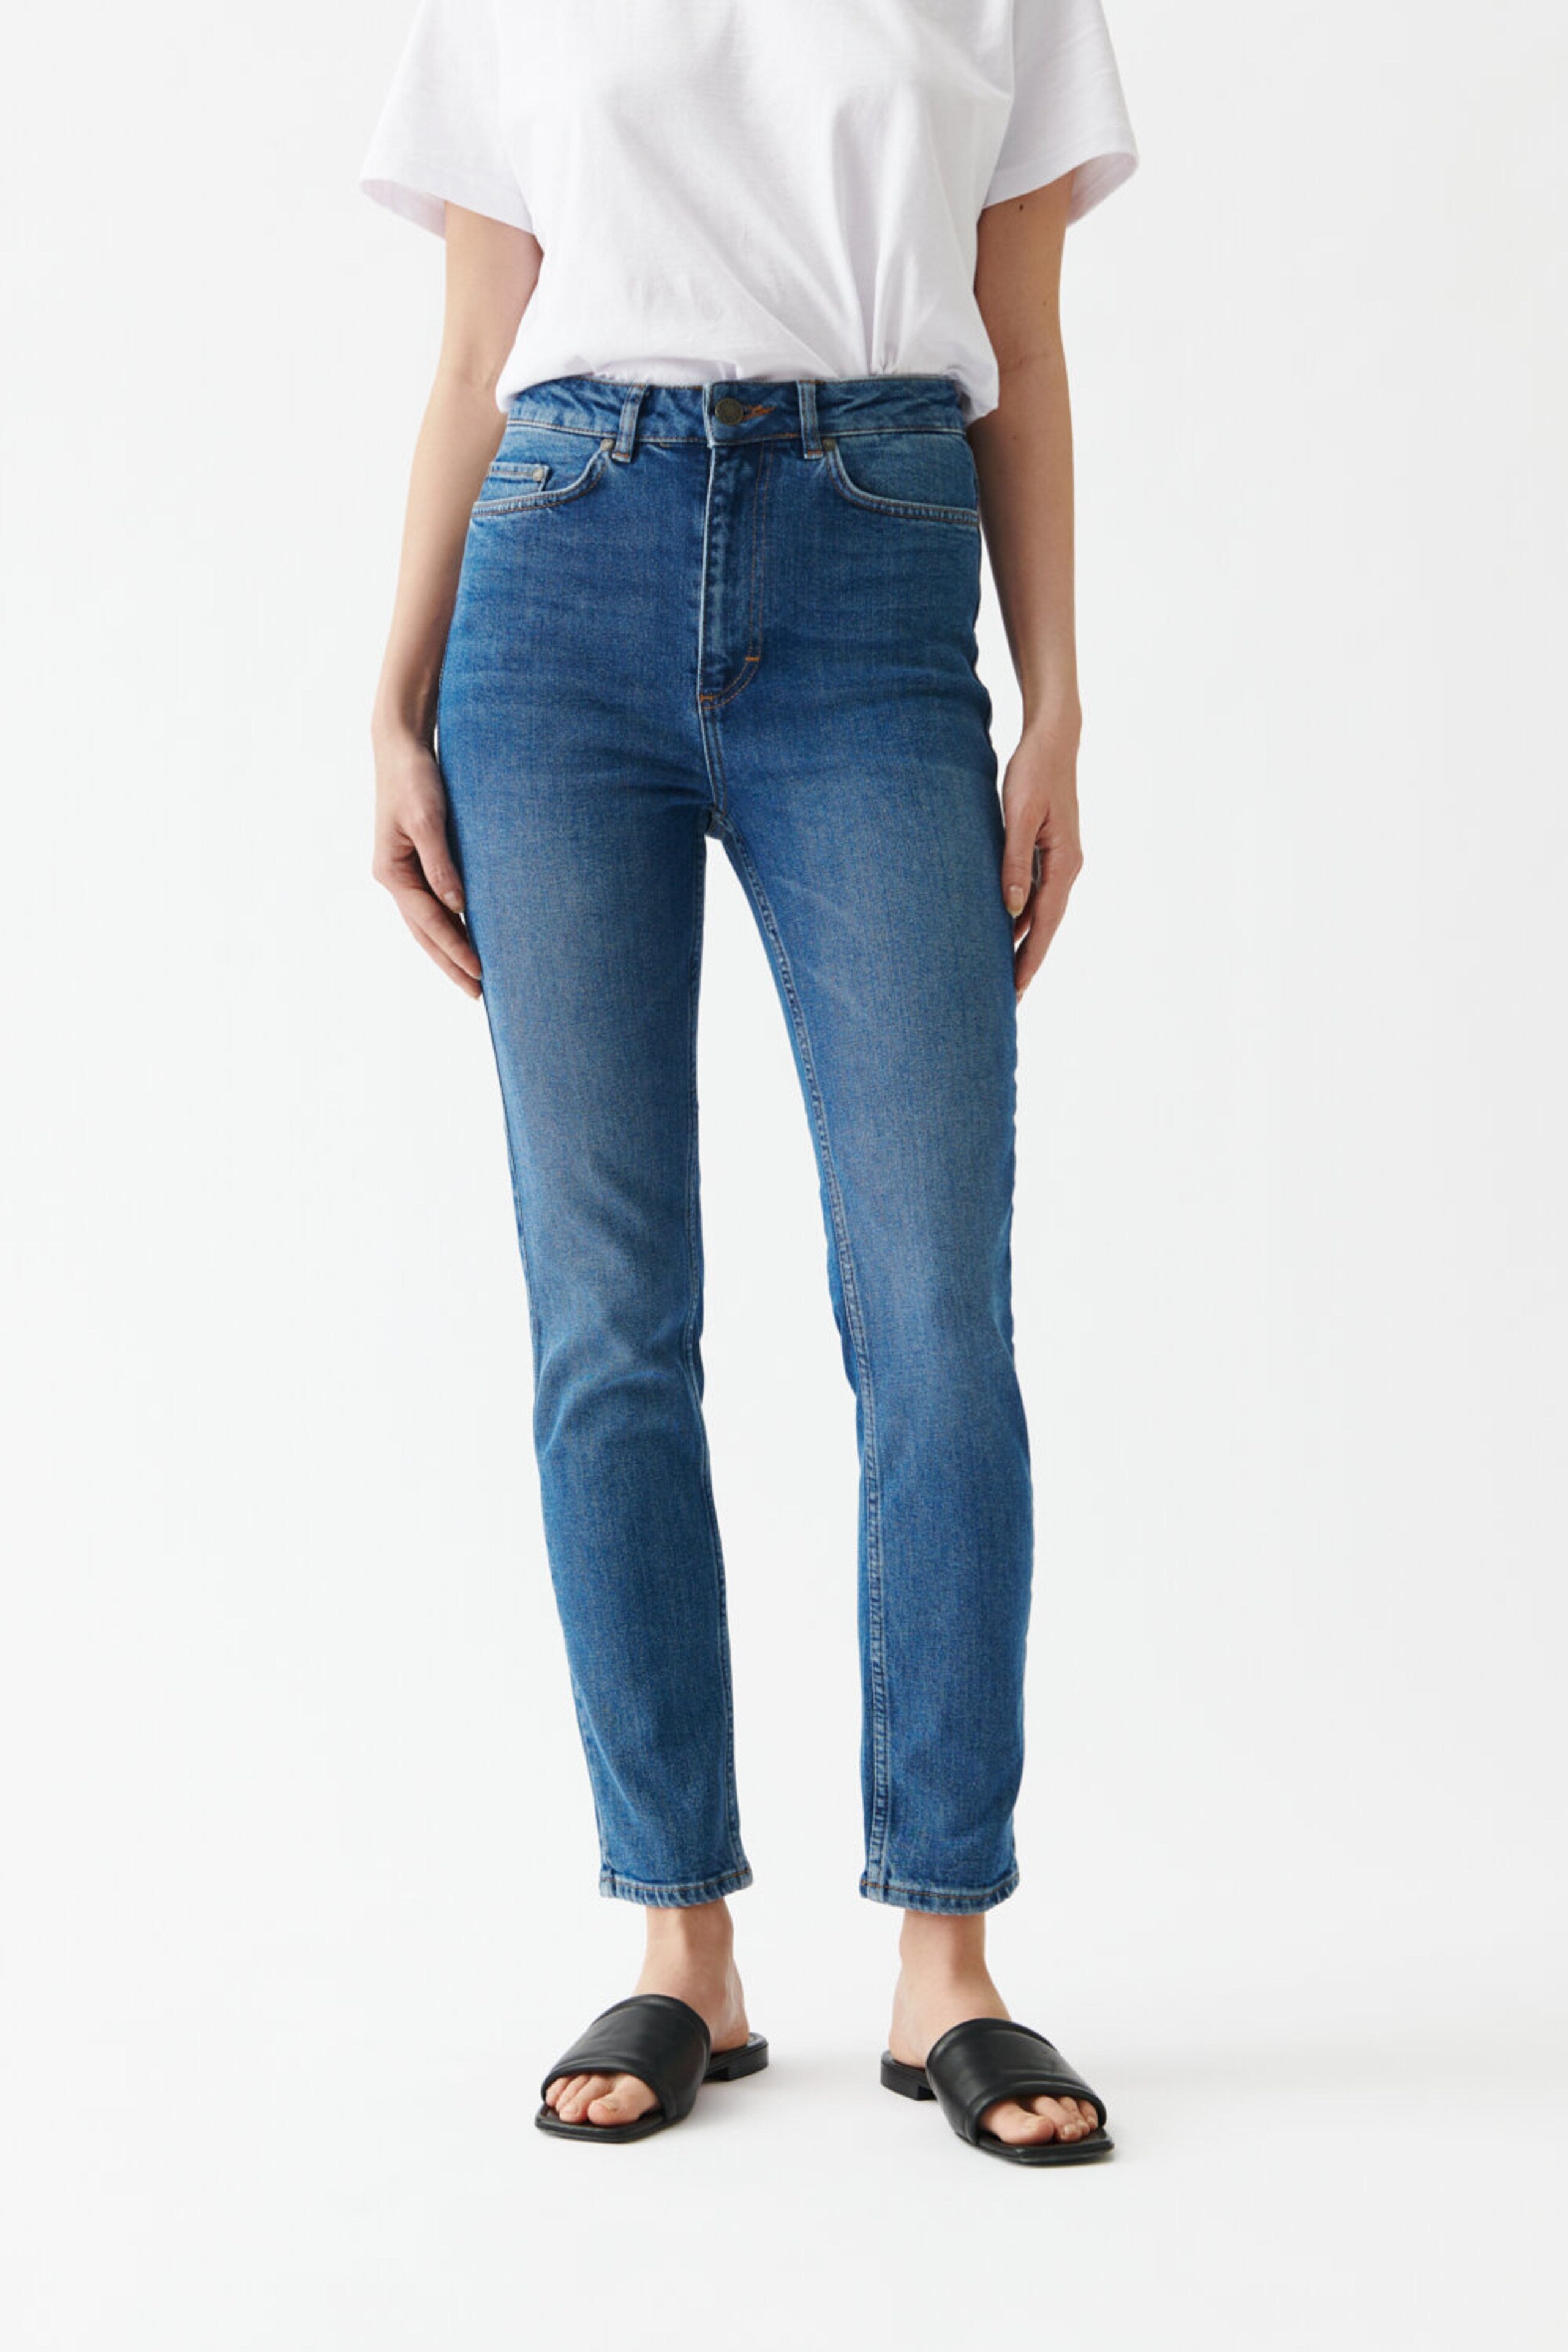 A woman wearing a white t-shirt and blue jeans, with Twist & Tango's Julie High Waist Skinny Jeans in Mid Blue.